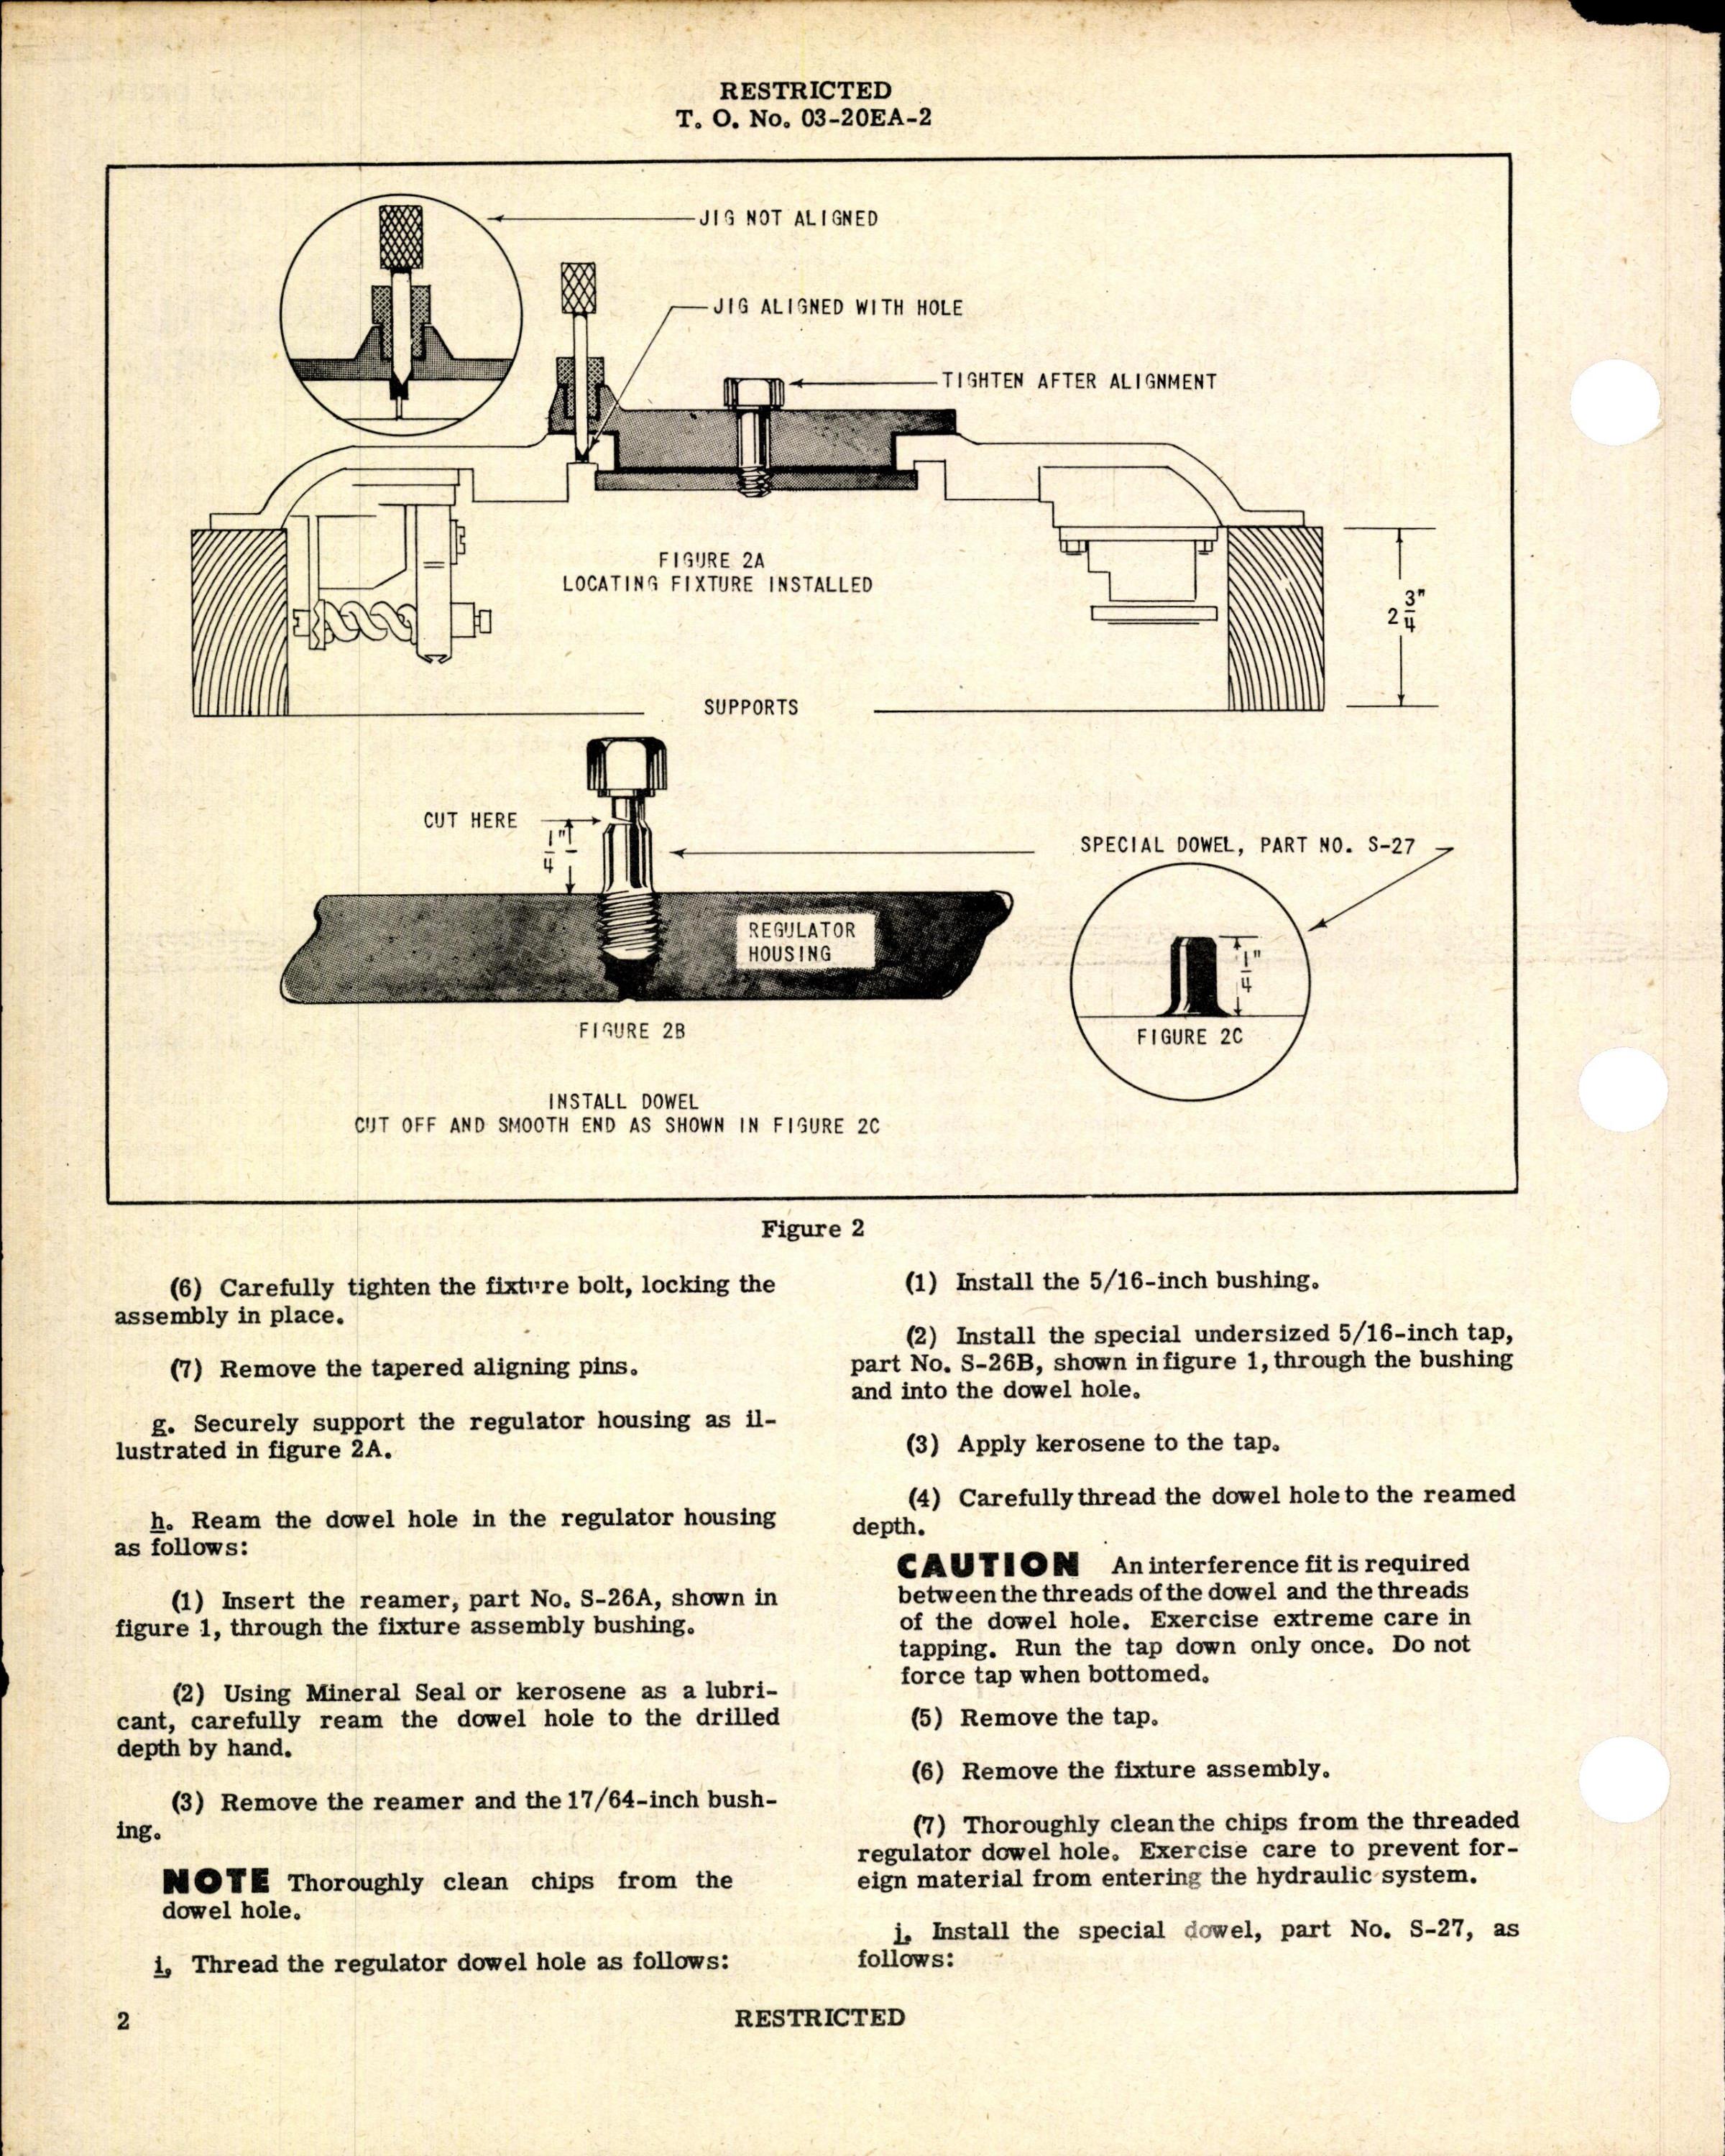 Sample page 2 from AirCorps Library document: Rework of Propeller Regulator Housing and Installation of Threaded Regulator Locating Dowel